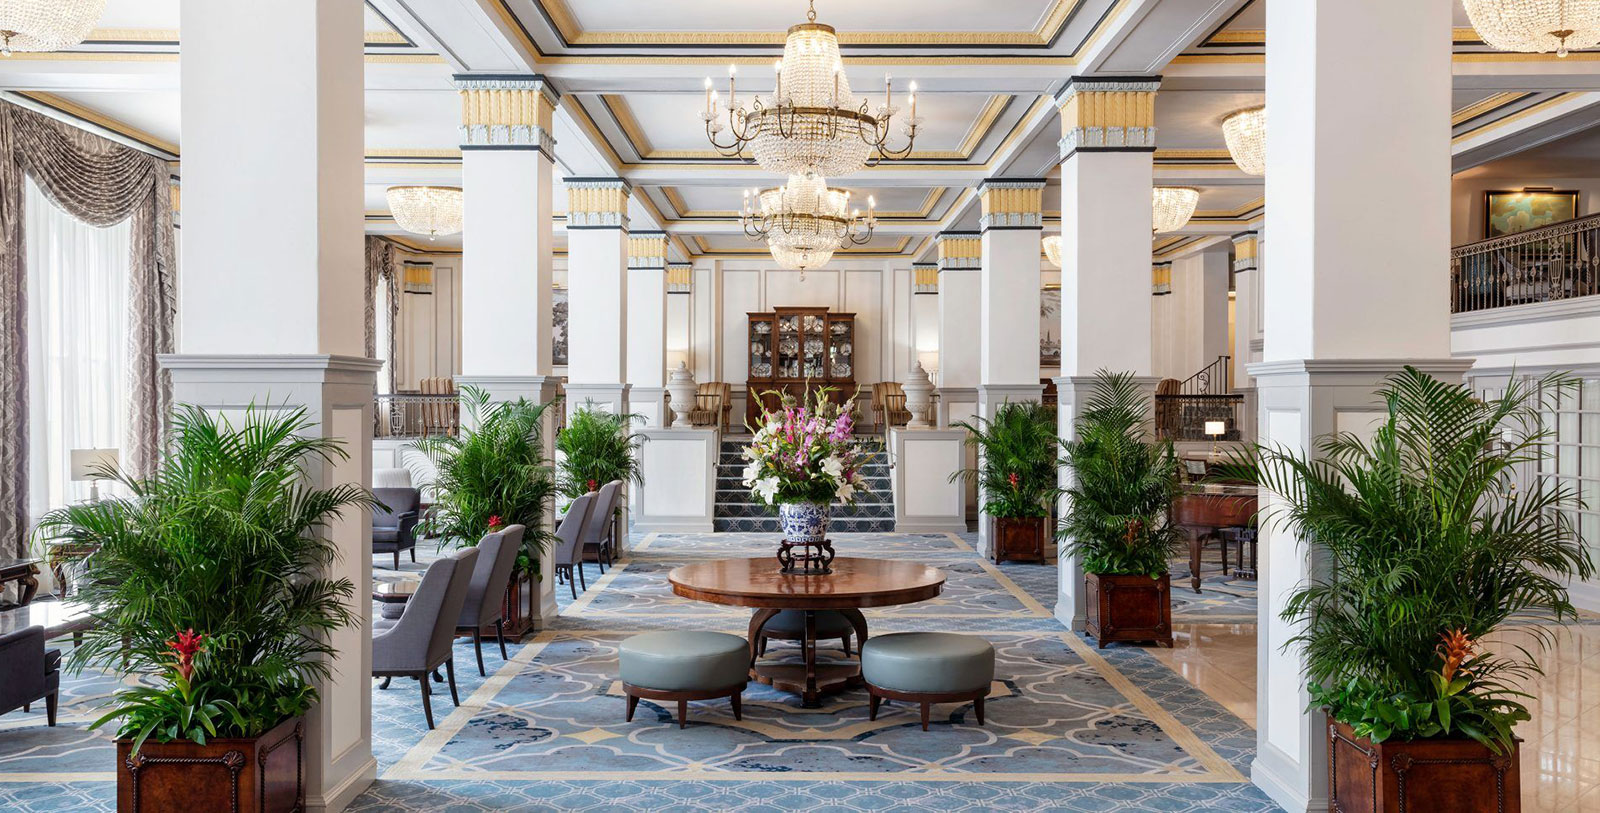 Image of hotel lobby at Francis Marion Hotel, 1924, Member of Historic Hotels of America, in Charleston, South Carolina, Overview